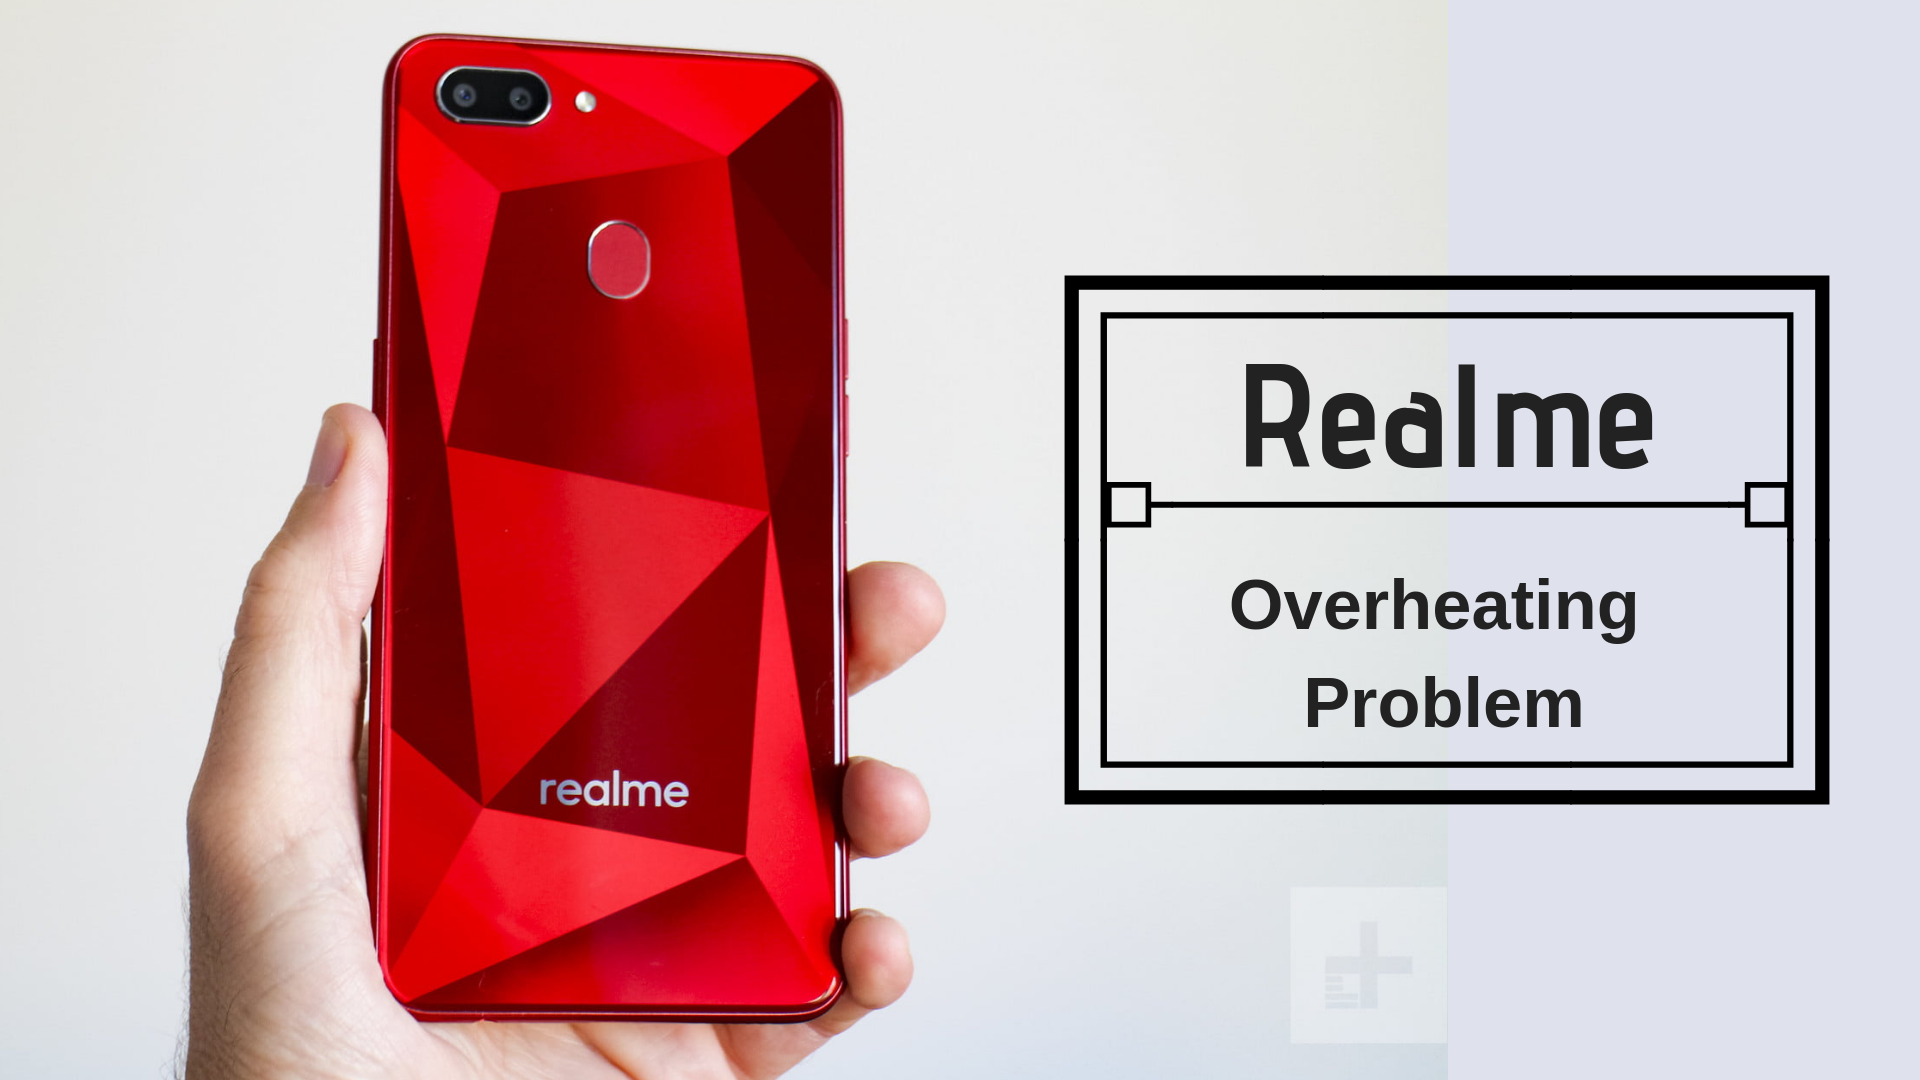 How To Fix Realme Not Charging Problem [Troubleshoot]